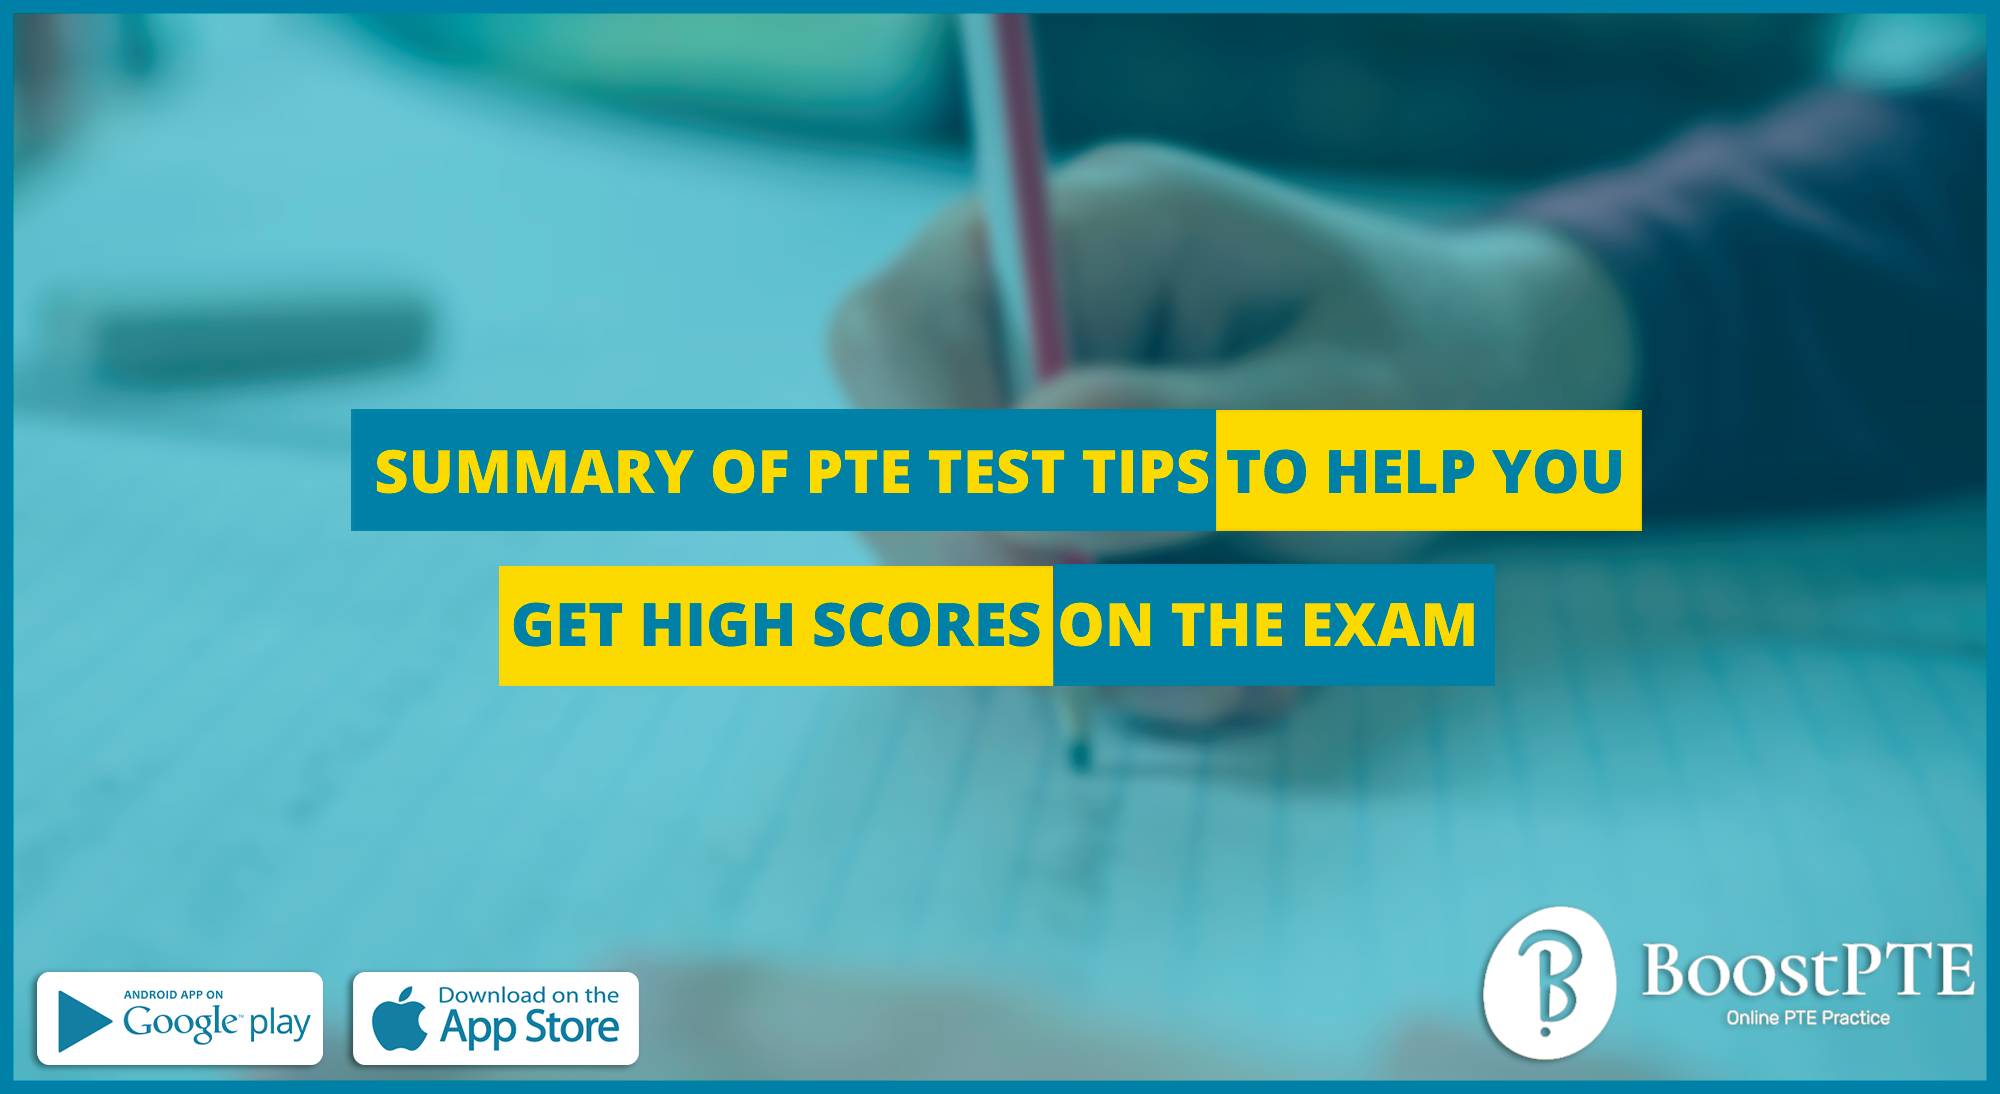 Summary of PTE Test Tips to Help You Get High Scores on the Exam